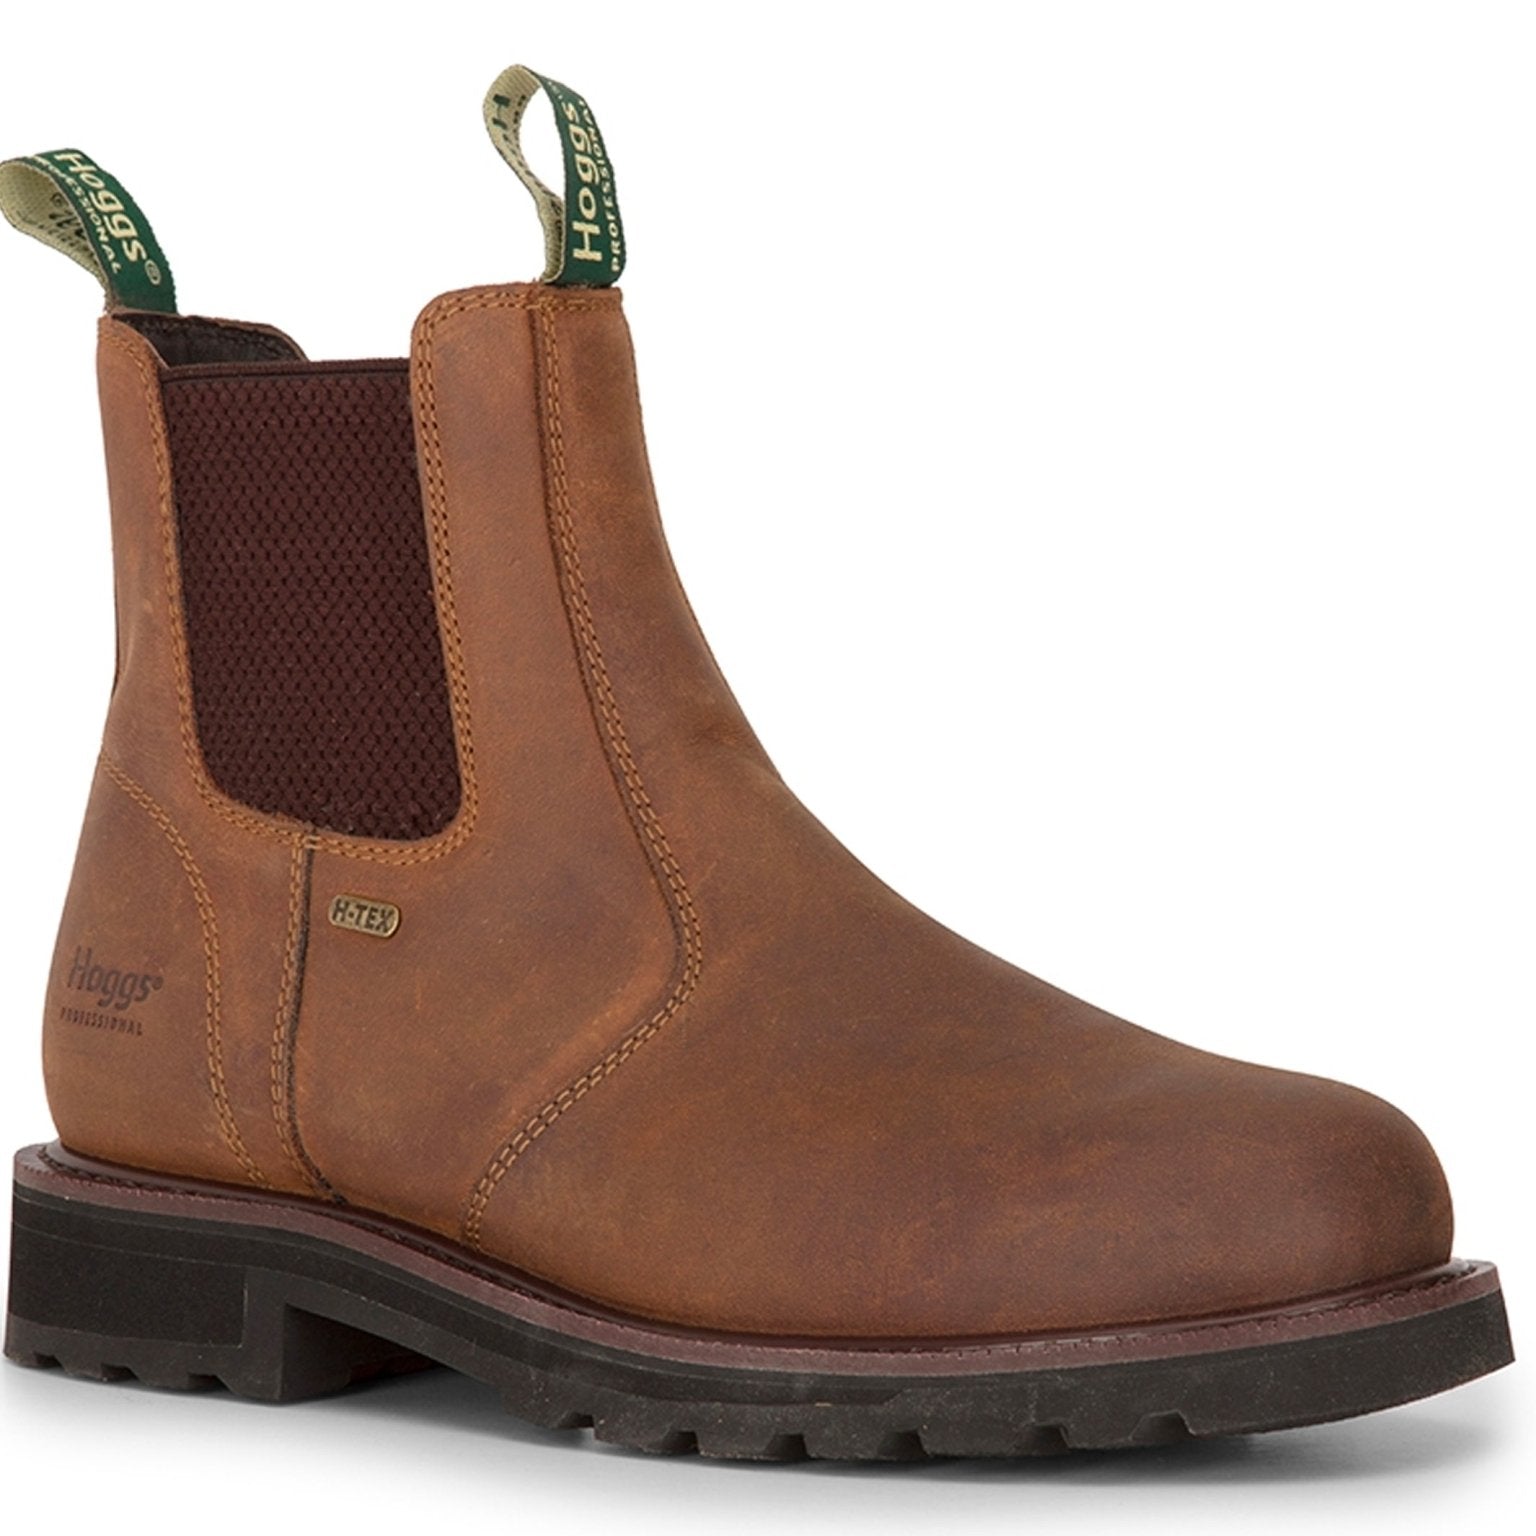 Hoggs of Fife Hoggs of Fife - Shire Pro Waterproof Mens Dealer boot - Mens chelsea Boots Safety Footwear